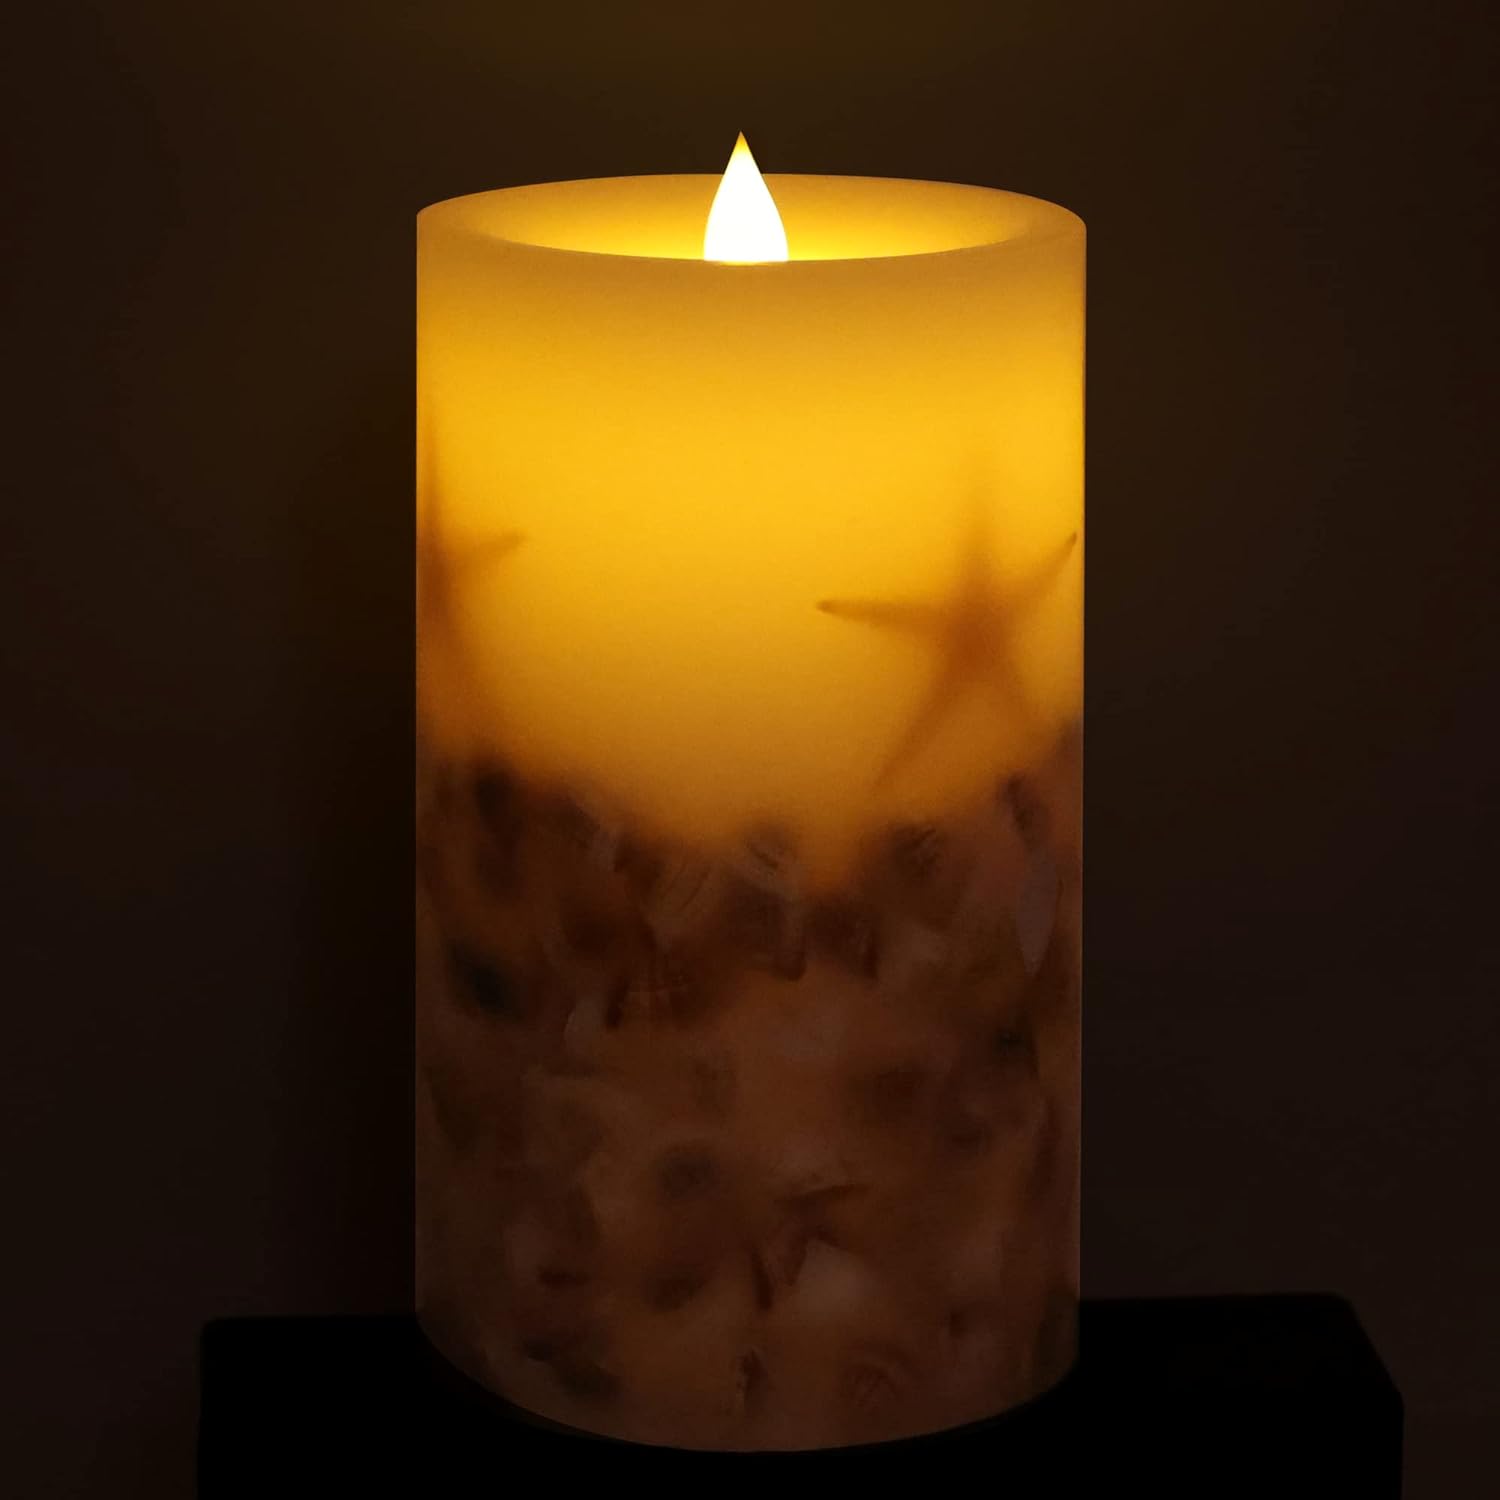 Flameless Candles (D 3.5" x H 7") Real Seashell Flickering Flame Effect, LED Pillar Candles Real Wax with Timer Battery Operated and Remote to Buy Separately